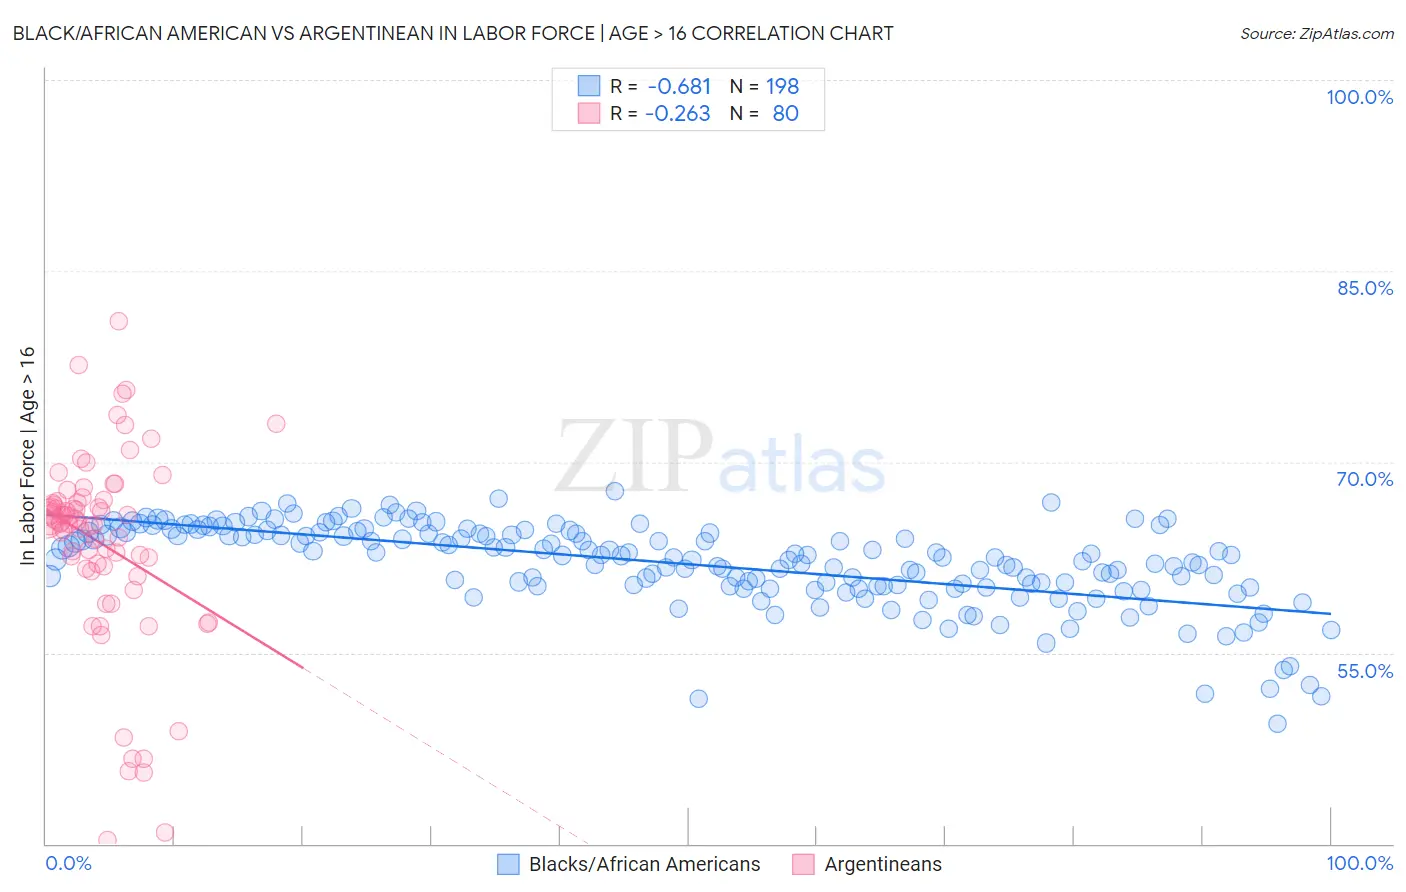 Black/African American vs Argentinean In Labor Force | Age > 16